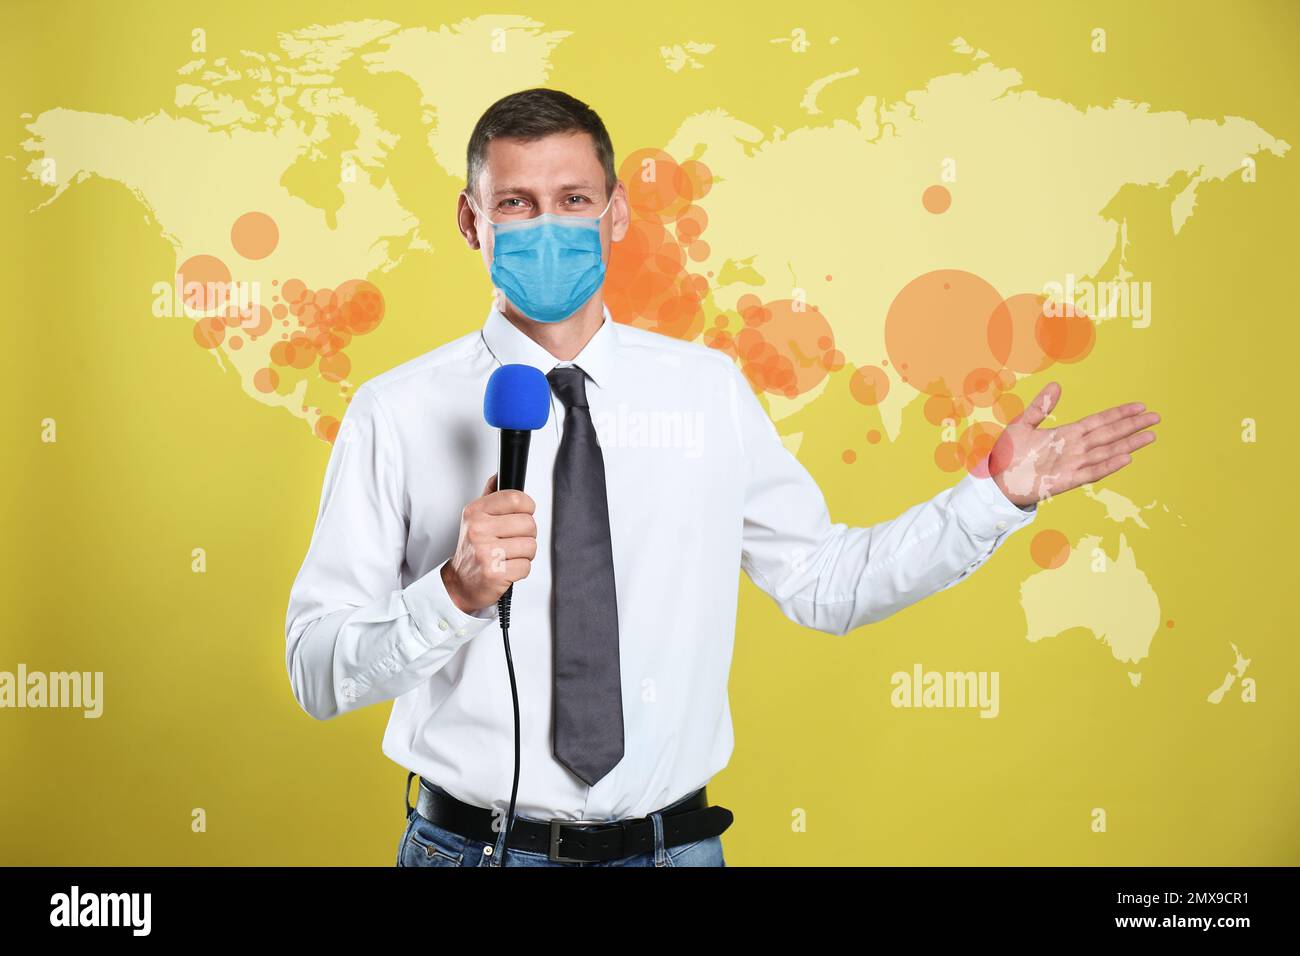 Journalist with medical mask presenting news during coronavirus outbreak. World map demonstrating spread of disease Stock Photo